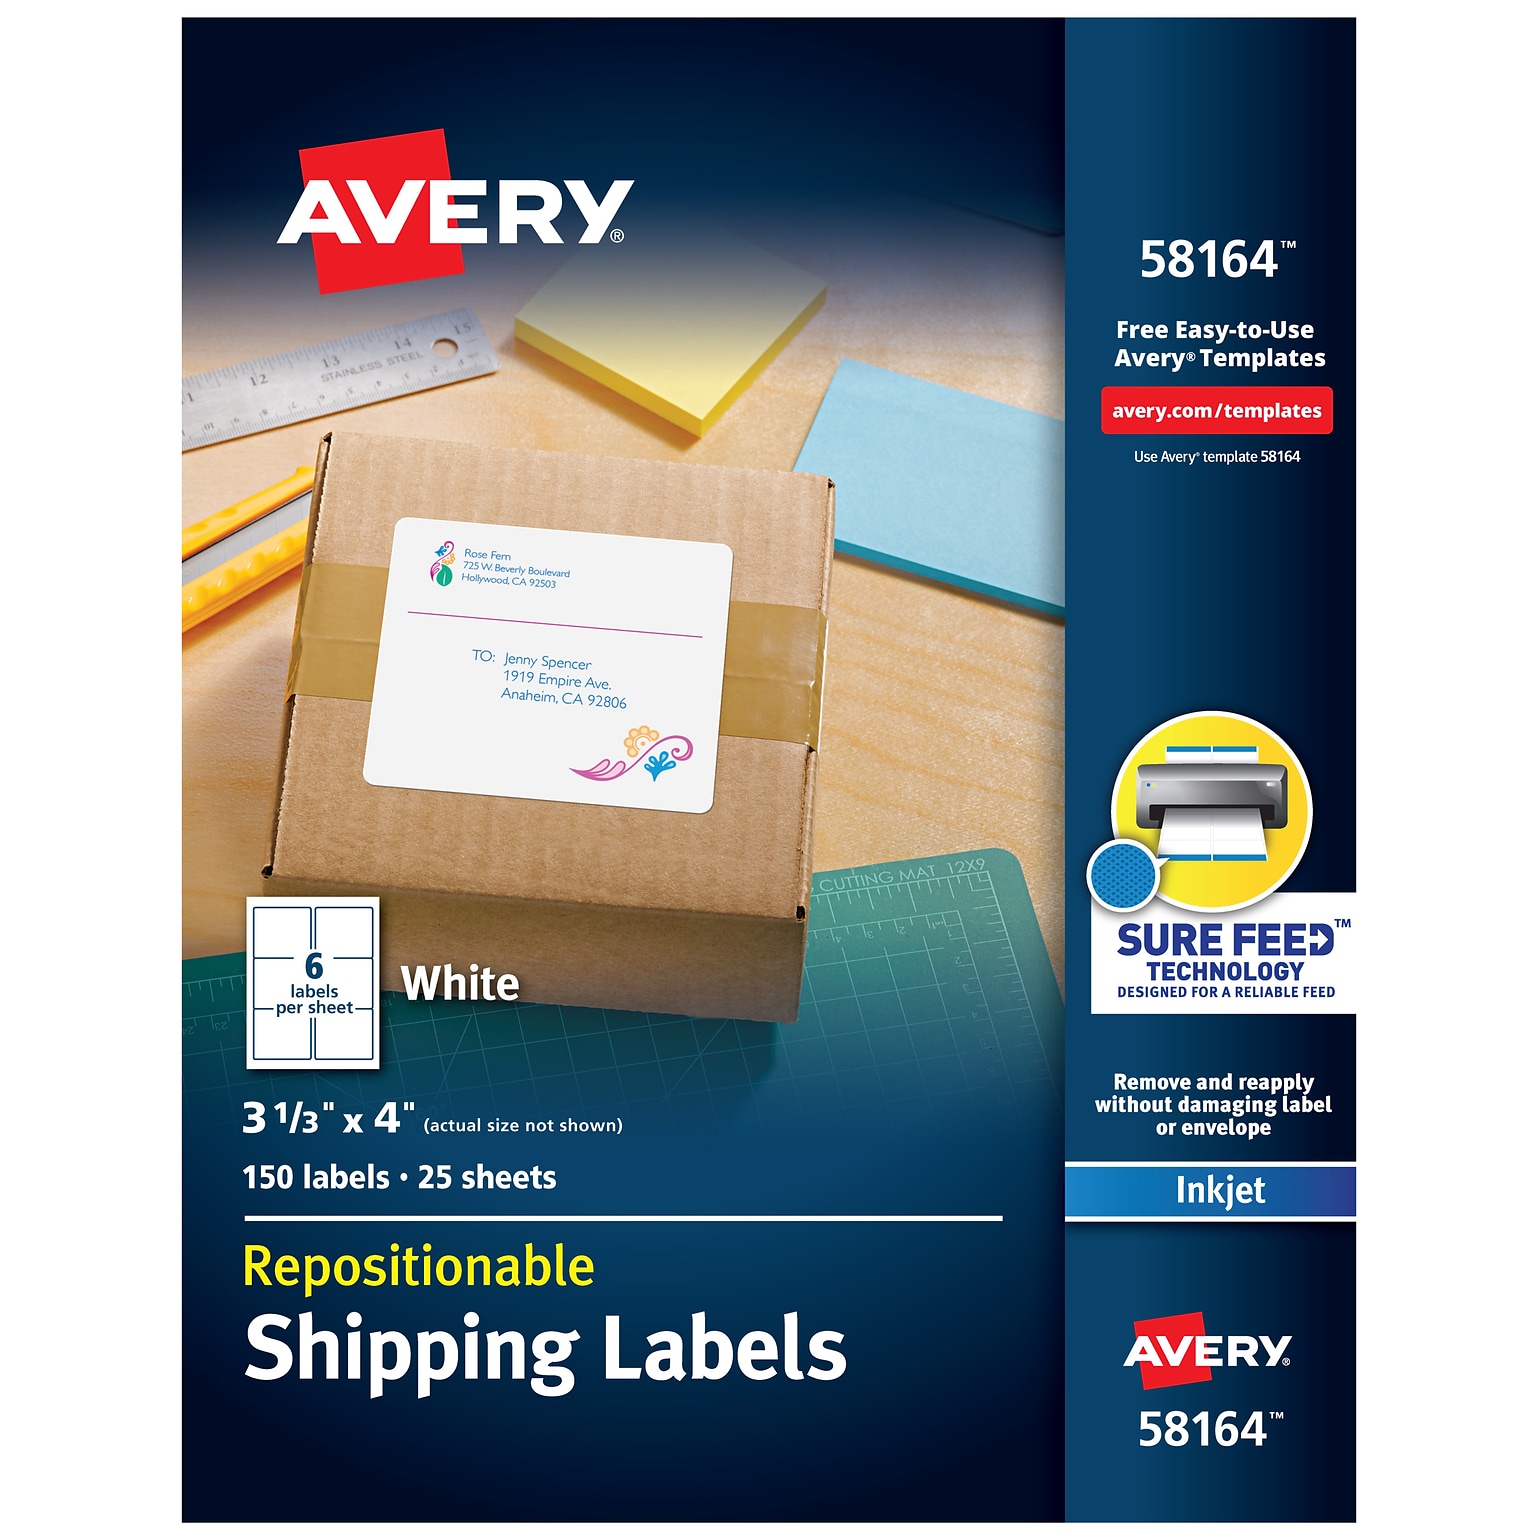 Avery Repositionable Inkjet Shipping Labels, 3-1/3 x 4, White, 6 Labels/Sheet, 25 Sheets/Box (58164)